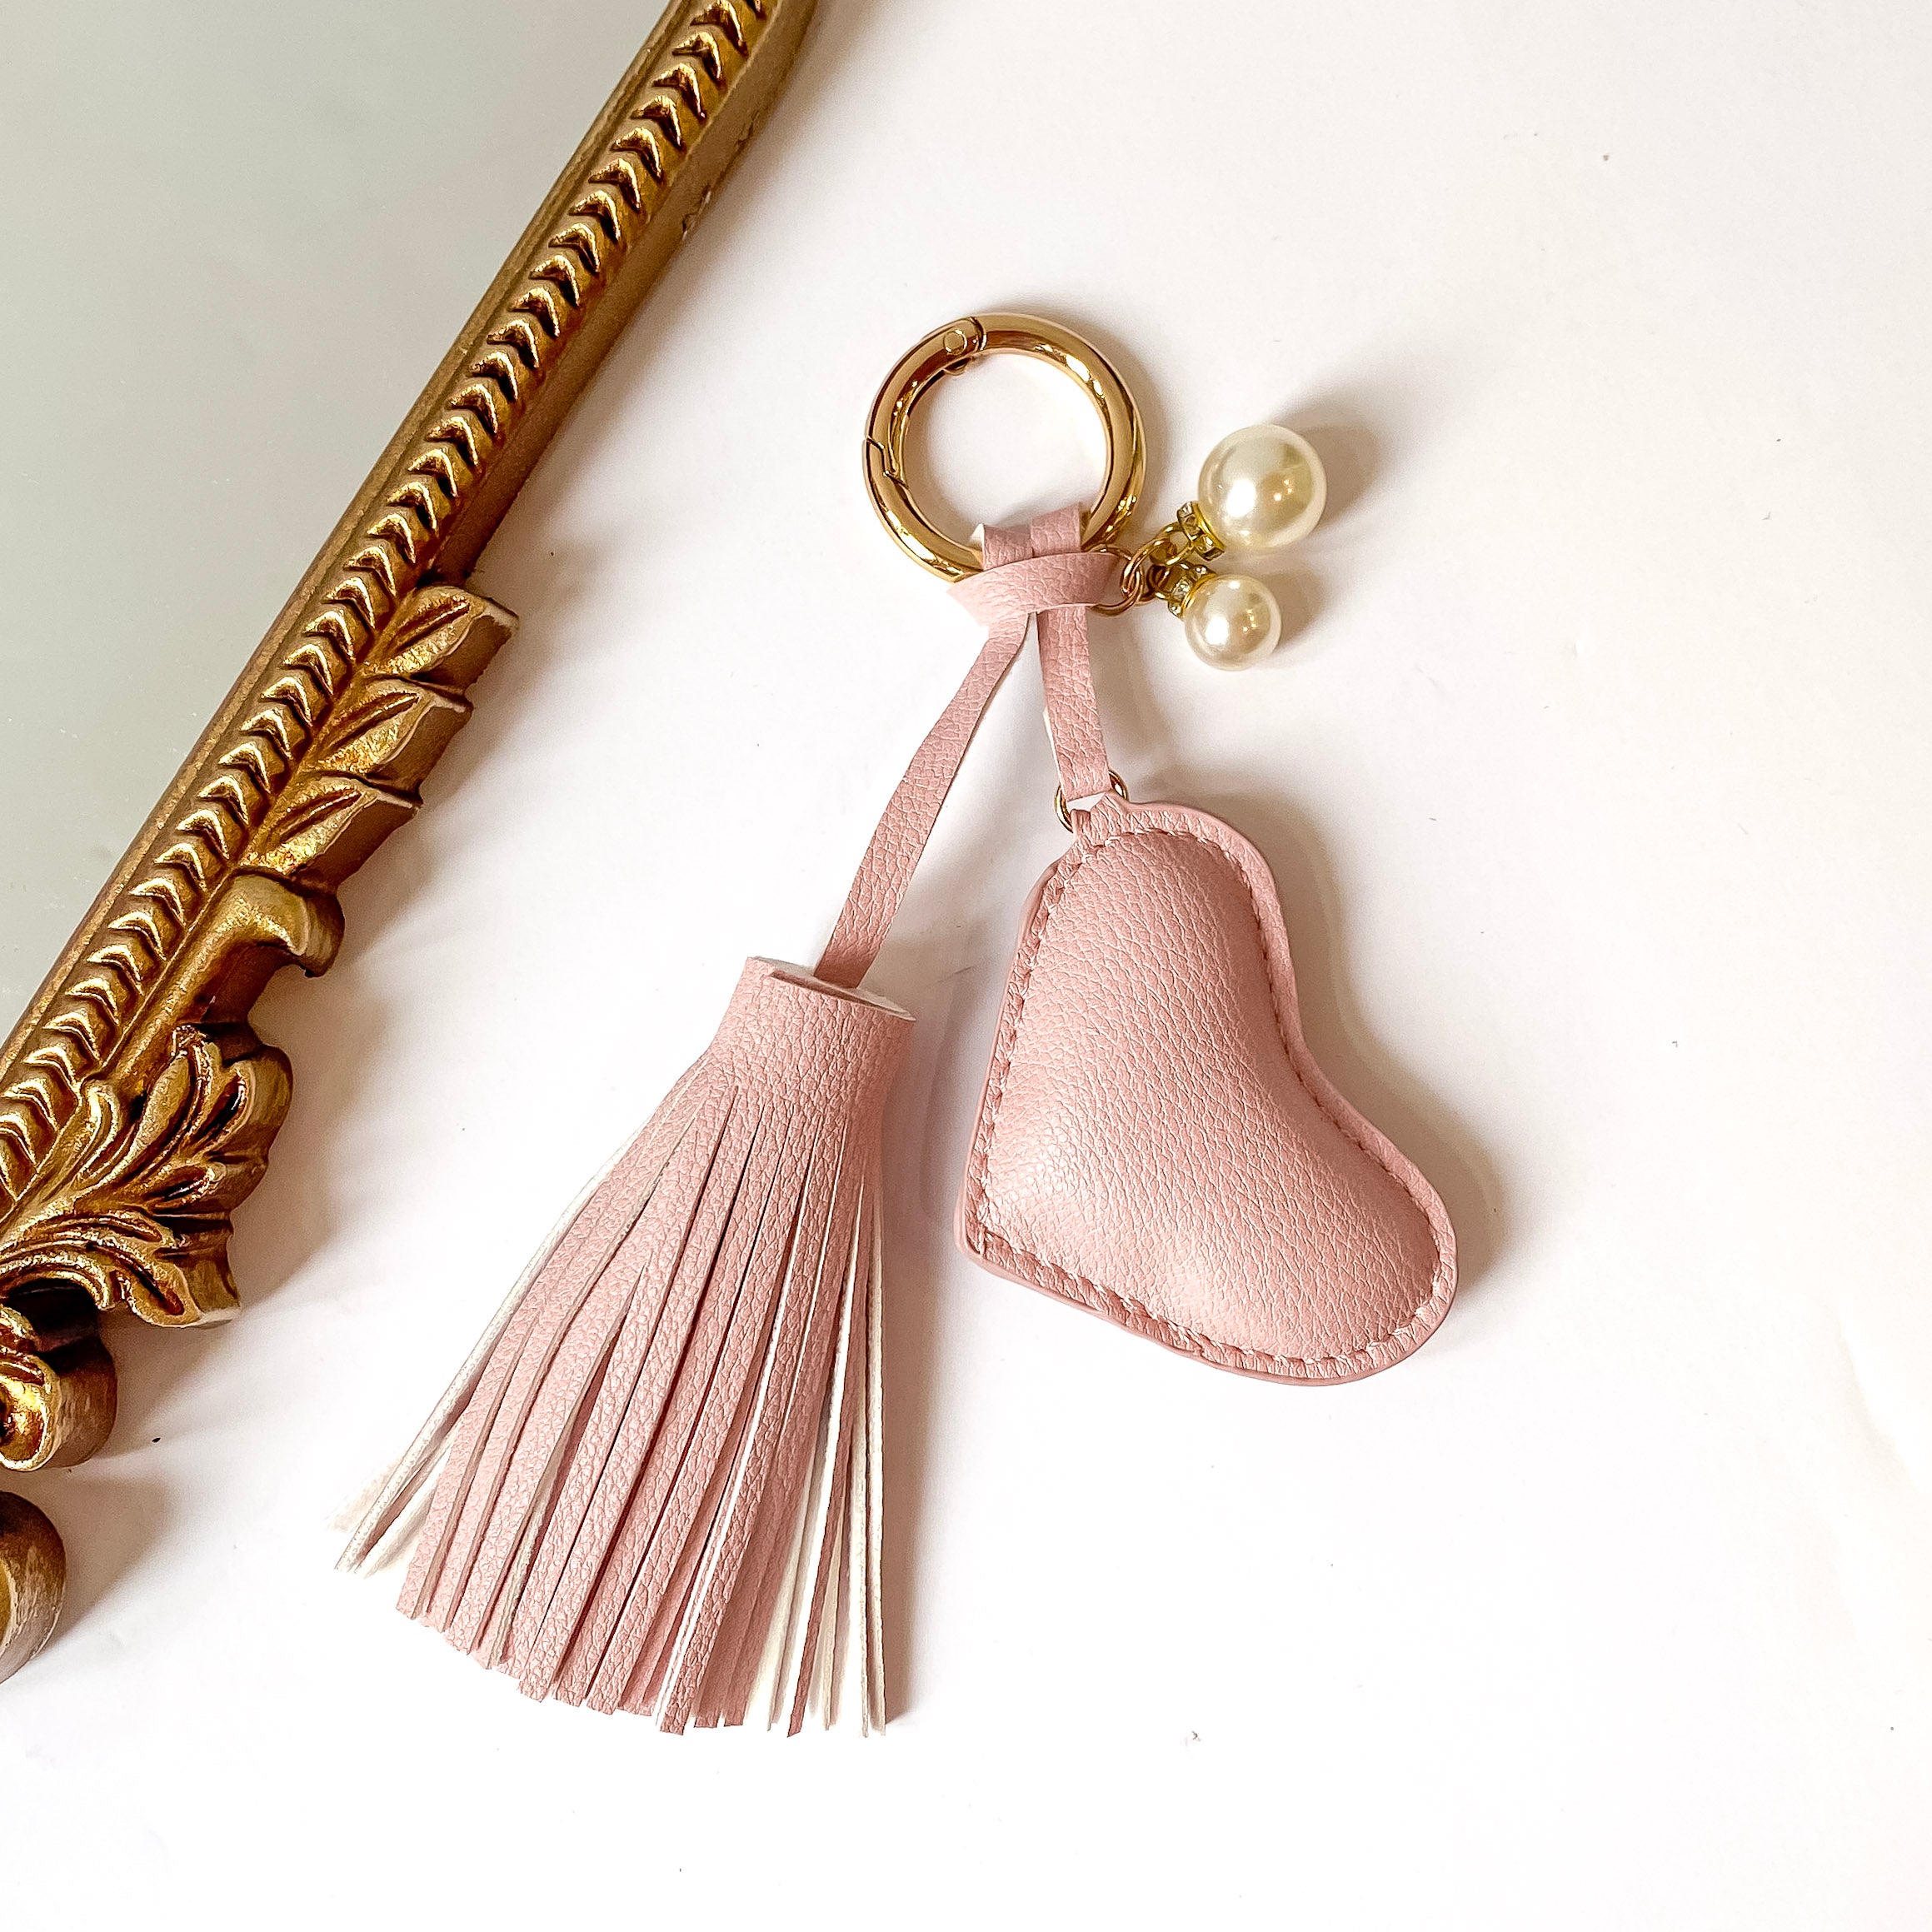 Gold key ring with a blush pink tassel and heart charm. This key ring also includes two white, pearl charms. This is pictured on a white background with a gold mirror on the left side of the picture. 